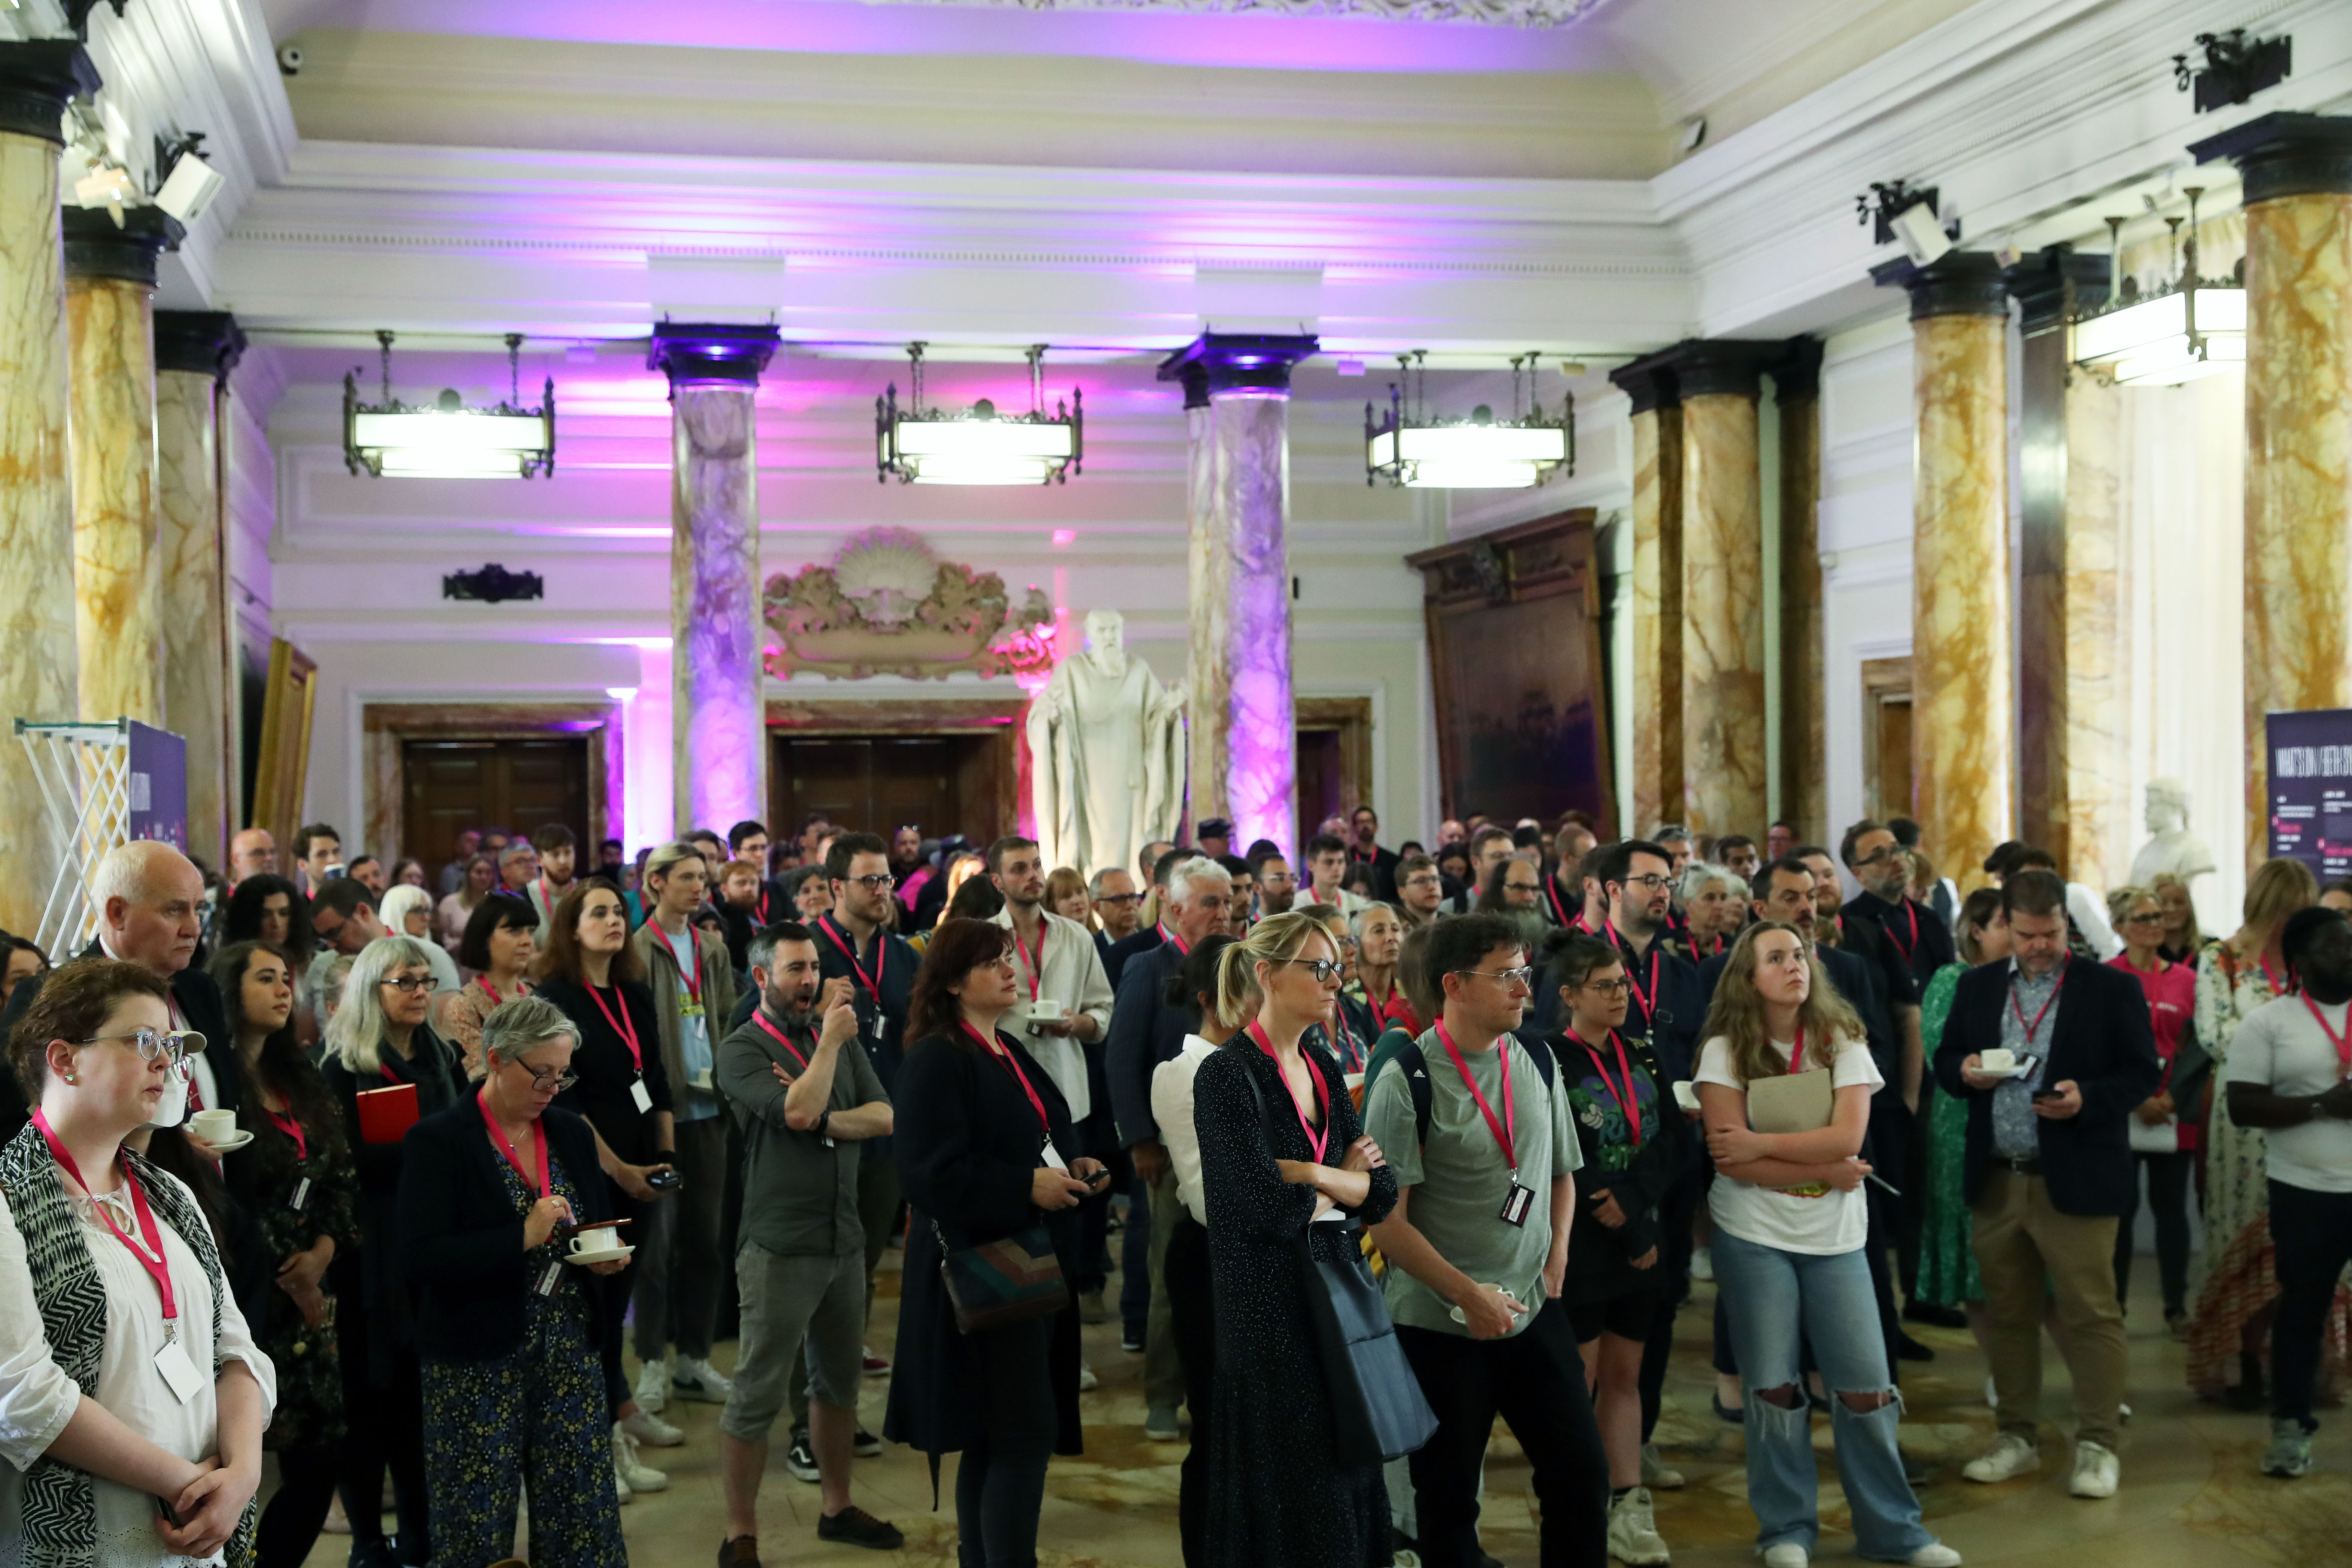 ClwstwrVerse attendees gather to hear opening address in Marble Hall, Cardiff City Hall